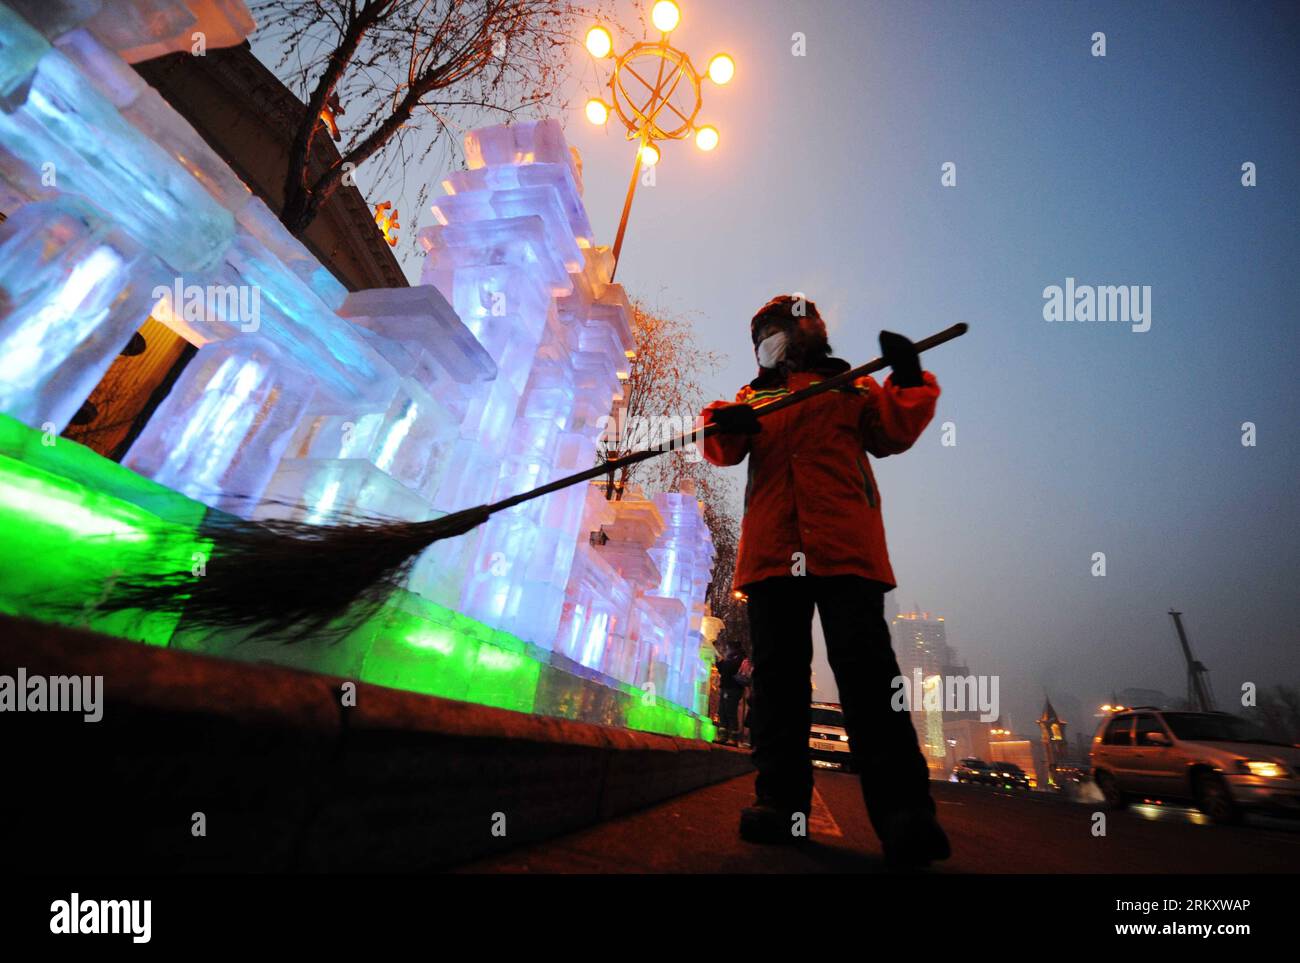 Bildnummer: 59095371  Datum: 16.01.2013  Copyright: imago/Xinhua HARBIN, Jan. 16, 2013 (Xinhua) -- Sanitation worker Yang Weixia works on a road in Harbin, capital of northeast China s Heilongjiang Province, Jan. 16, 2013. Yang Weixia, 48, is an ordinary sanitation worker living in Harbin, a city known for its bitterly cold winters and often called the Ice City. For 32 years, Yang has never stopped sweating away at her work, though she often gets up at three o clock every morning and will not go back home until 9 in the evening in the cold winter. There are more than 10,000 sanitation workers Stock Photo